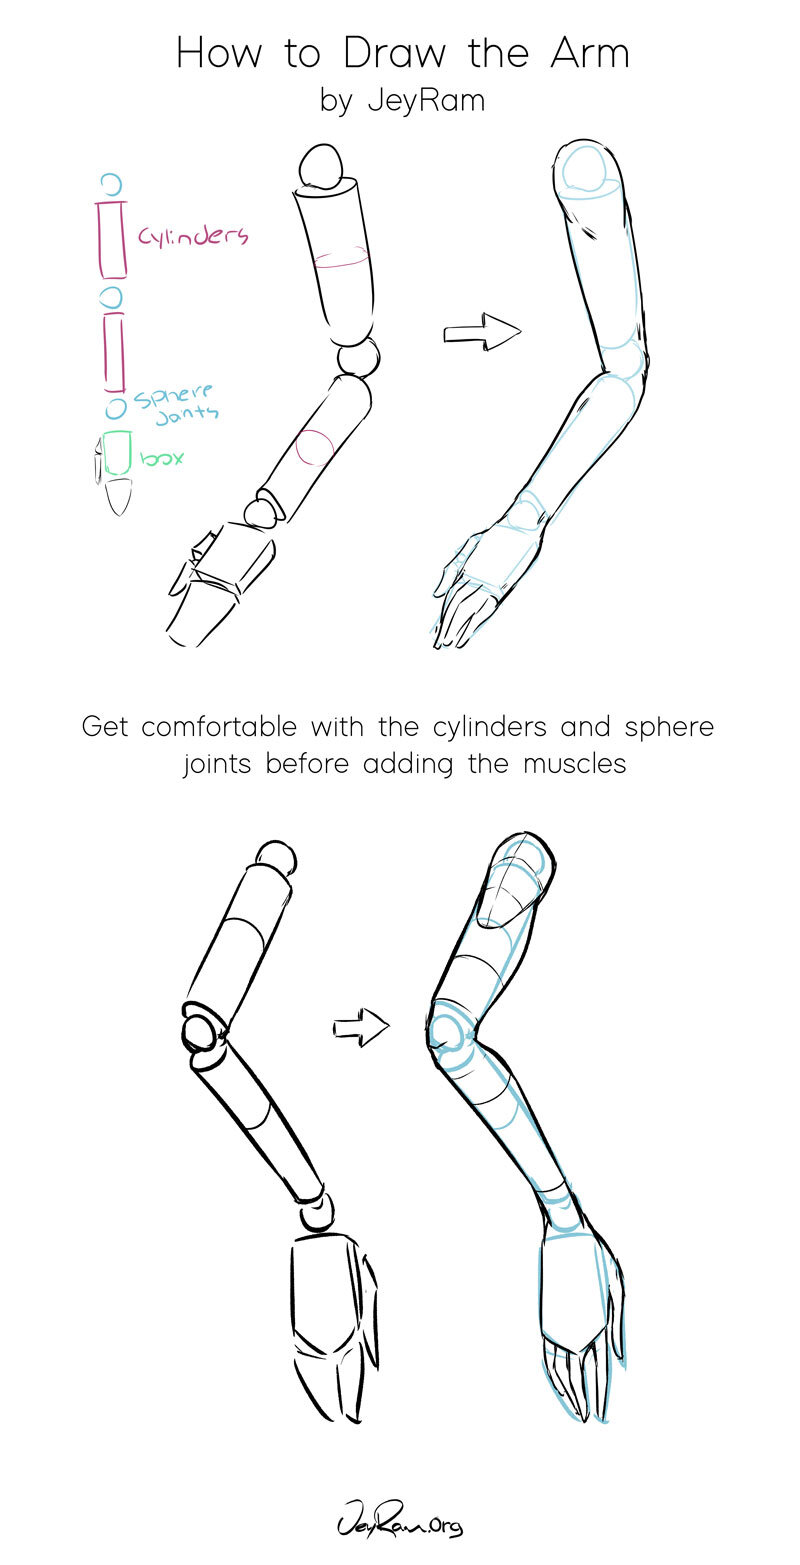 How To Draw The Arm Jeyram Art Download over 500 hand reference photos! how to draw the arm jeyram art